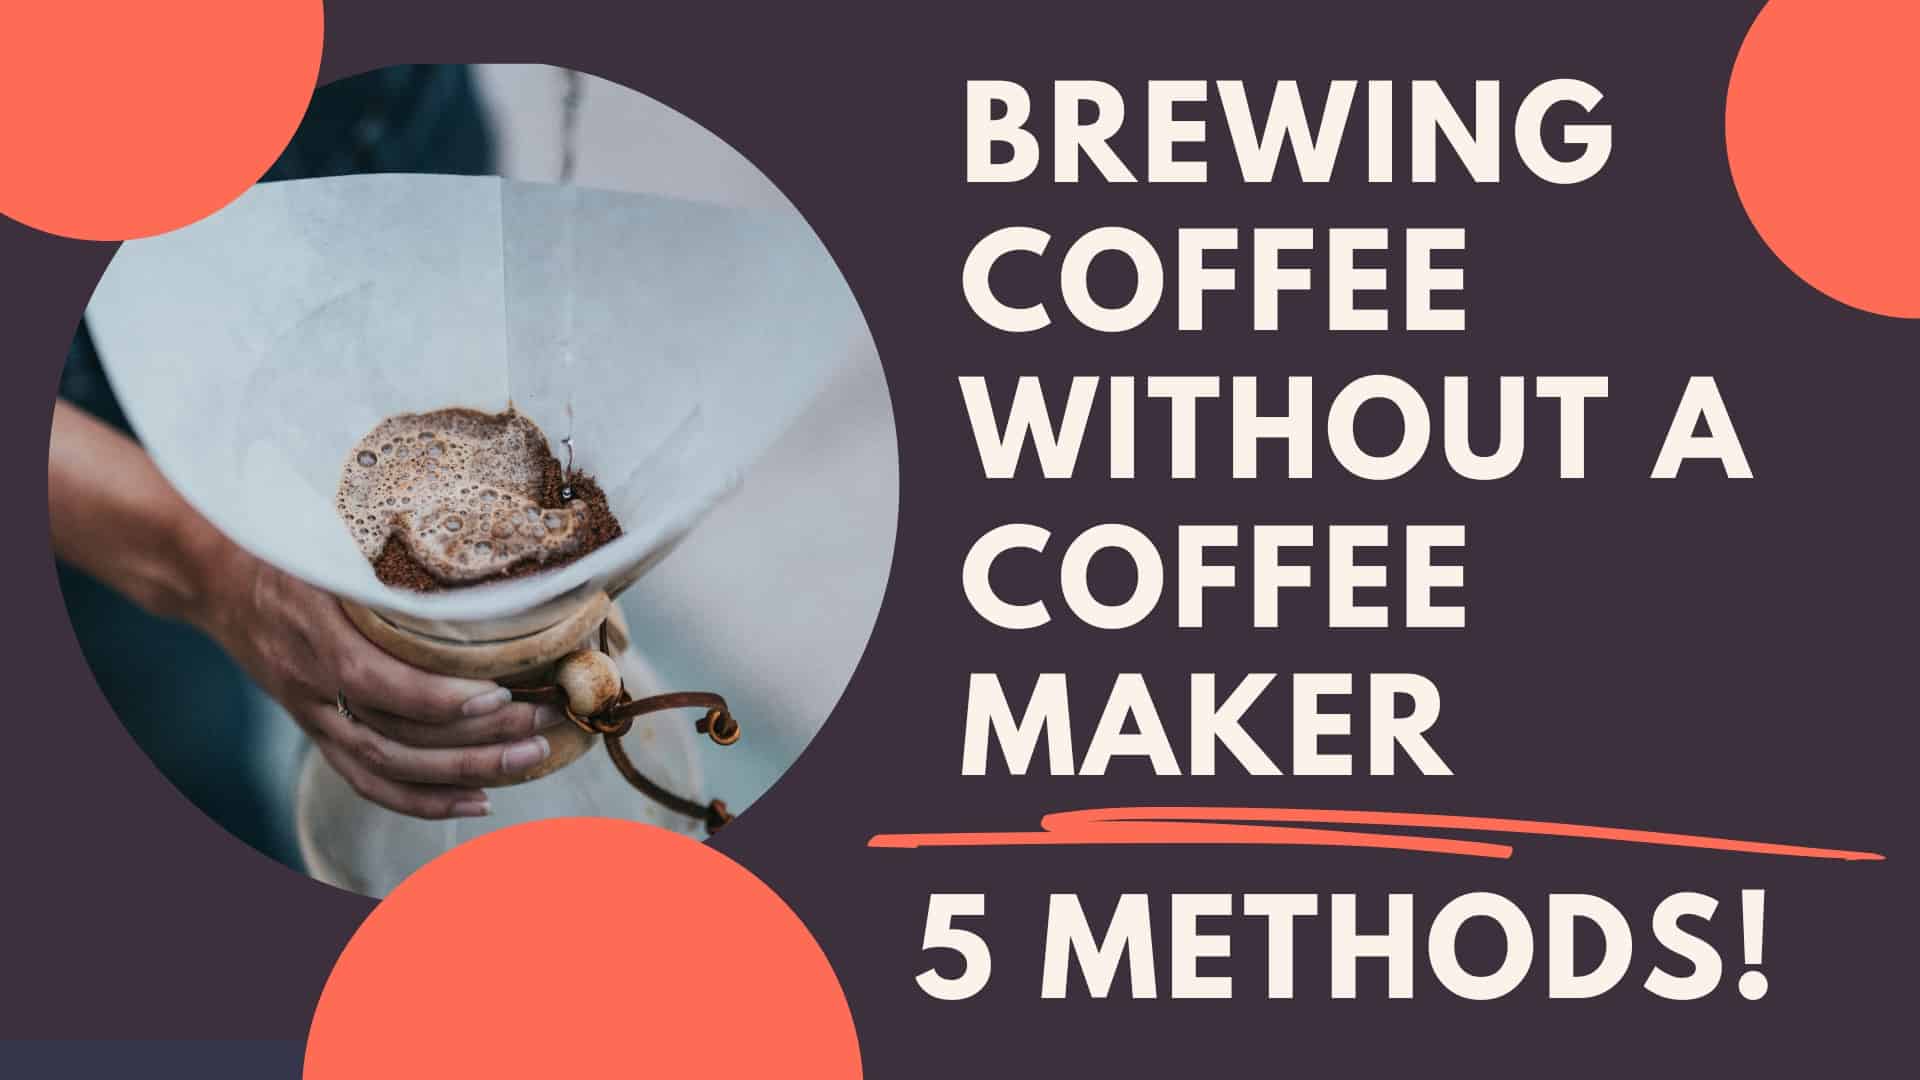 Brewing Coffee Without a Coffee Maker